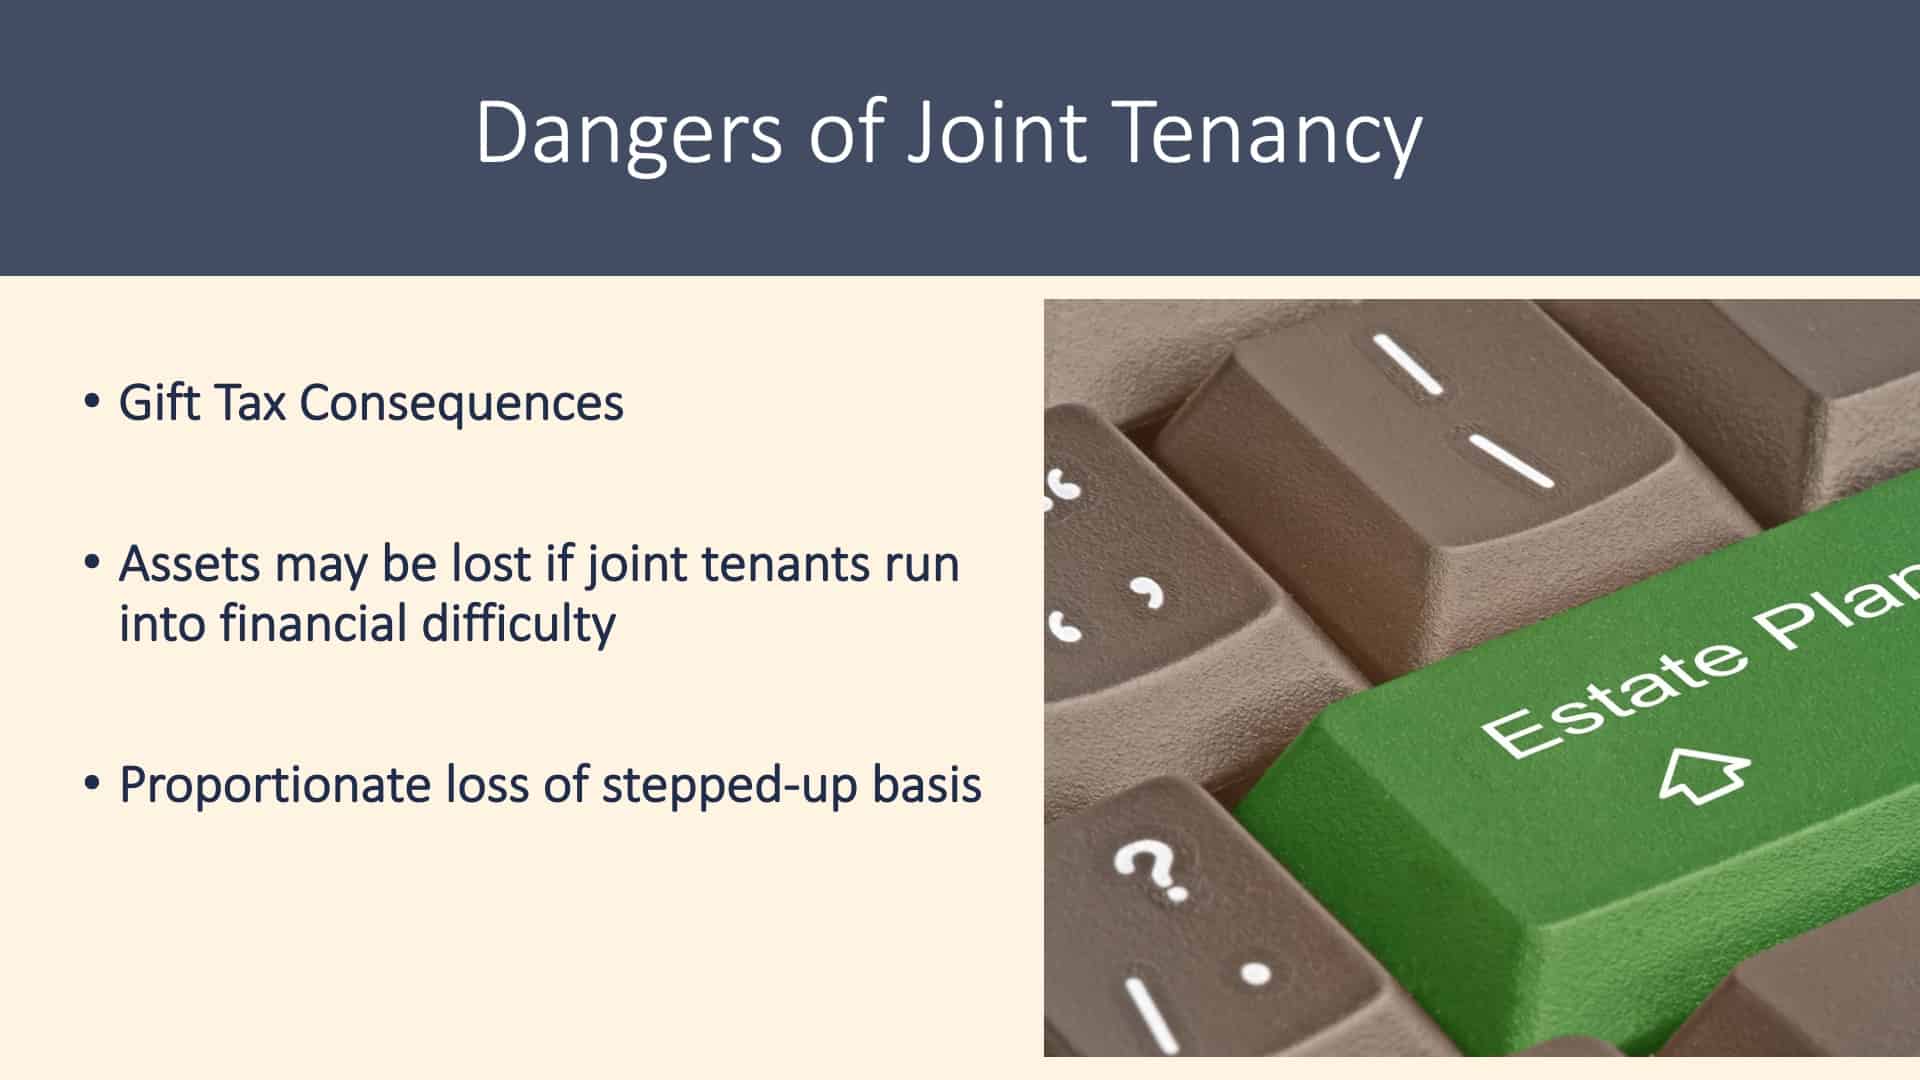 Is a Will Enough? - Dangers of Joint Tenancy